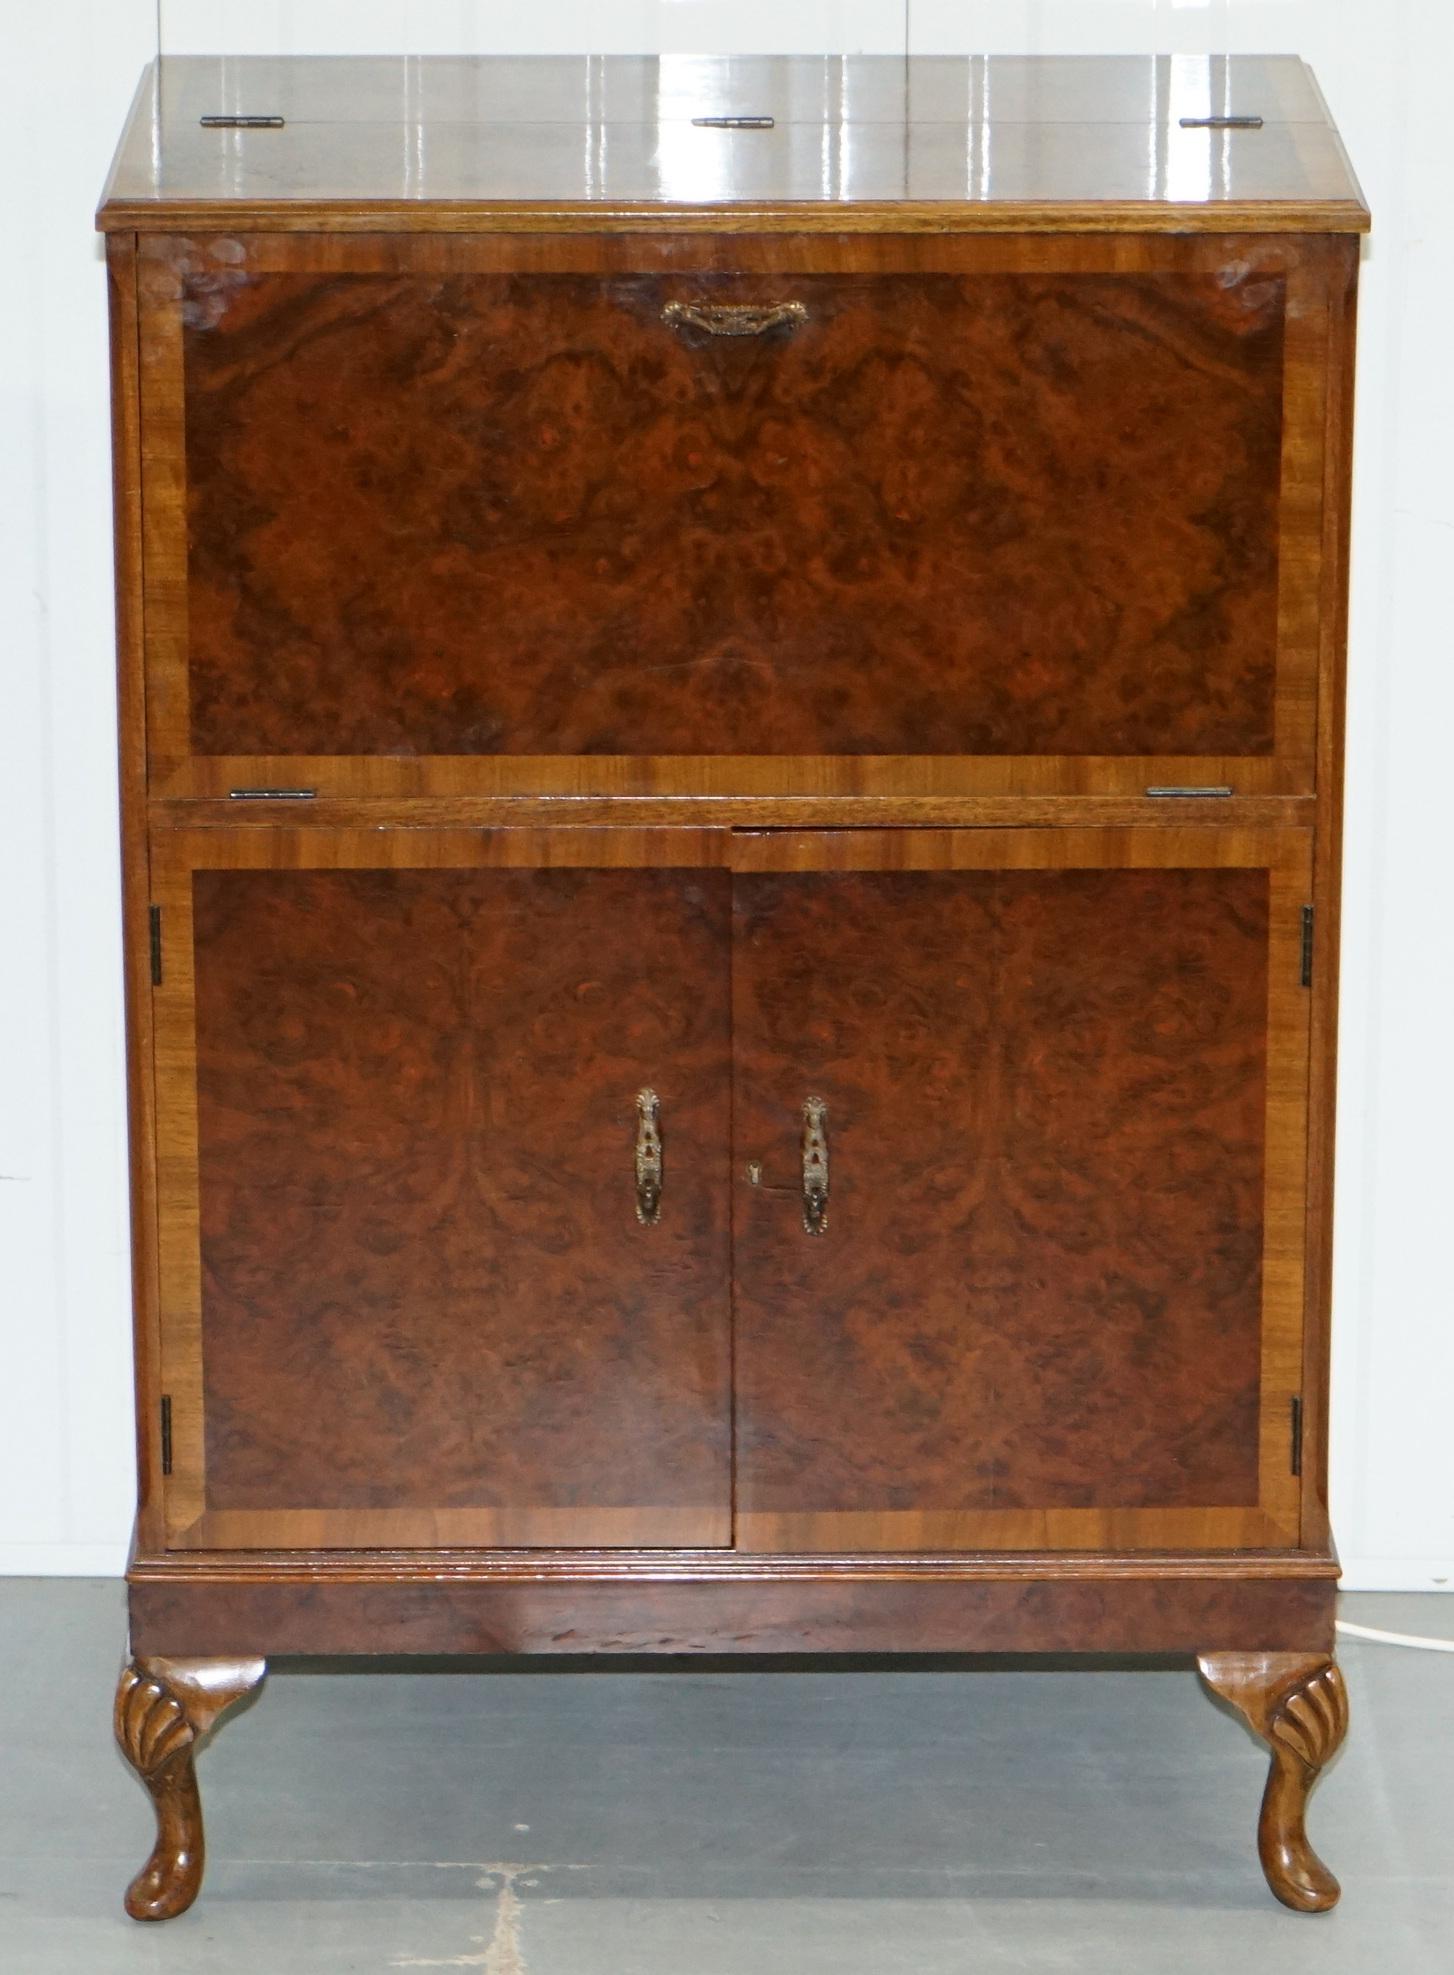 We are delighted to offer for sale this stunning original 1920s Art Deco burr walnut drinks cabinet

A very good looking well made and decorative piece of functional furniture, the burr walnut veneer is book cut and looks sublime from every angle,